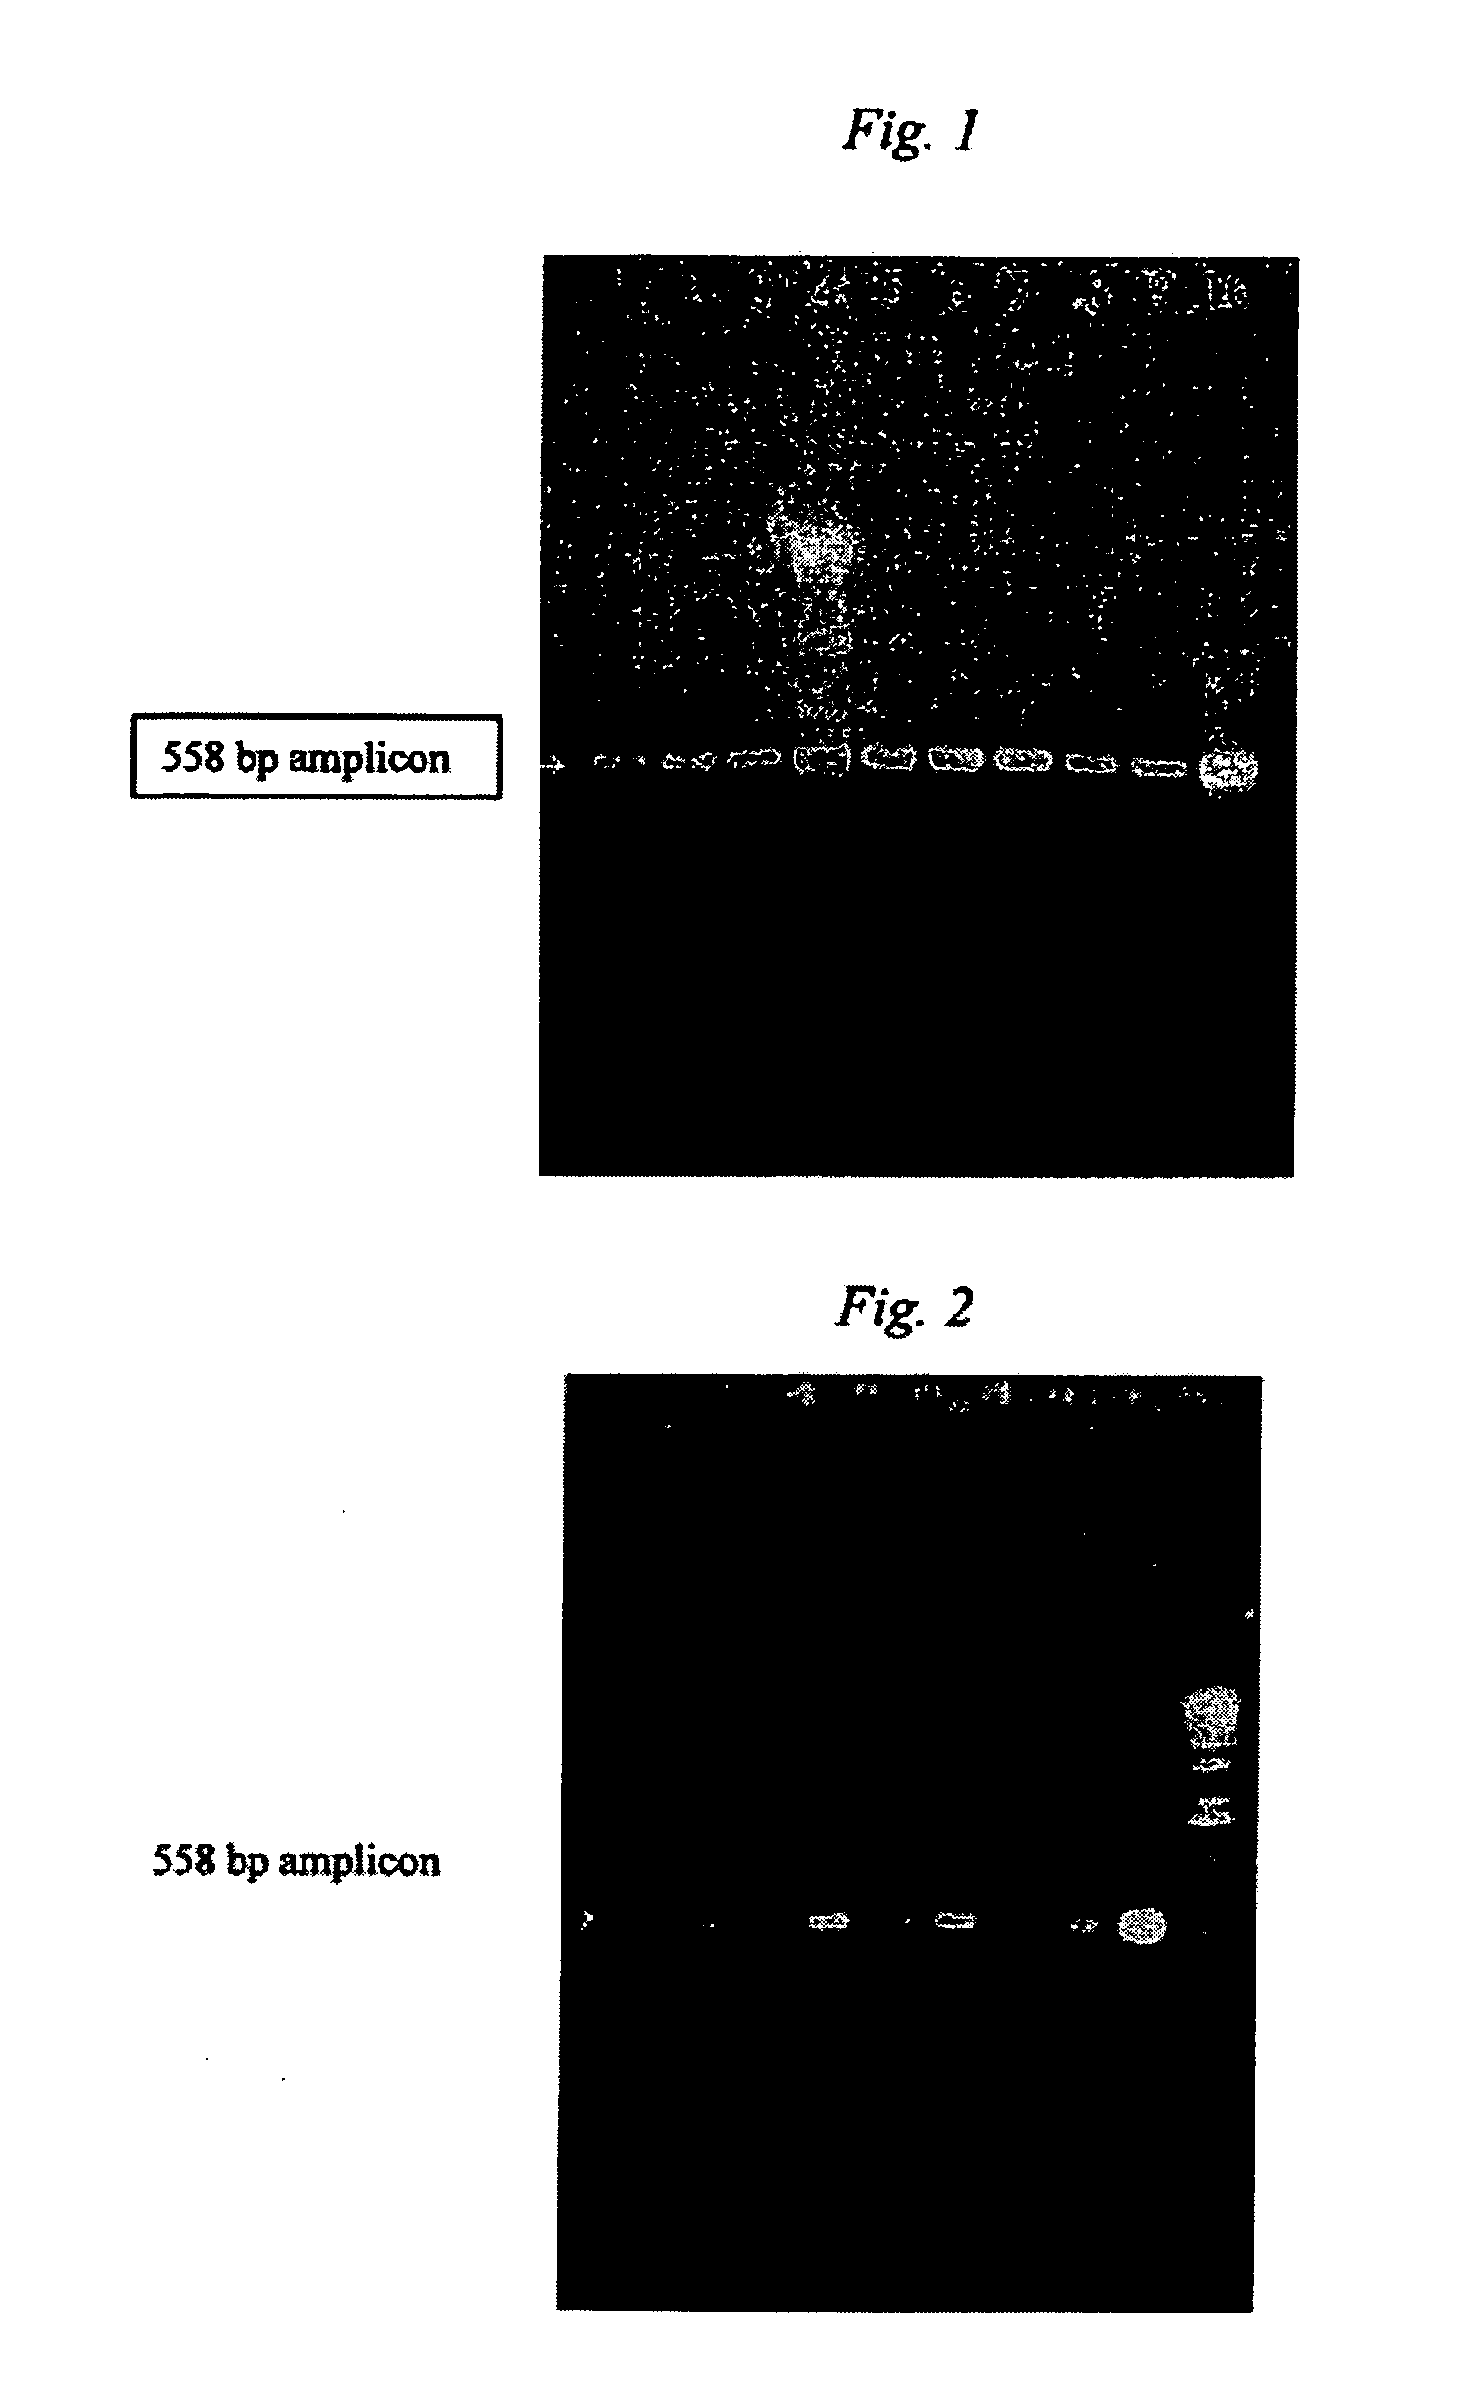 Nanoparticles for manipulation of biopolymers and methods of thereof